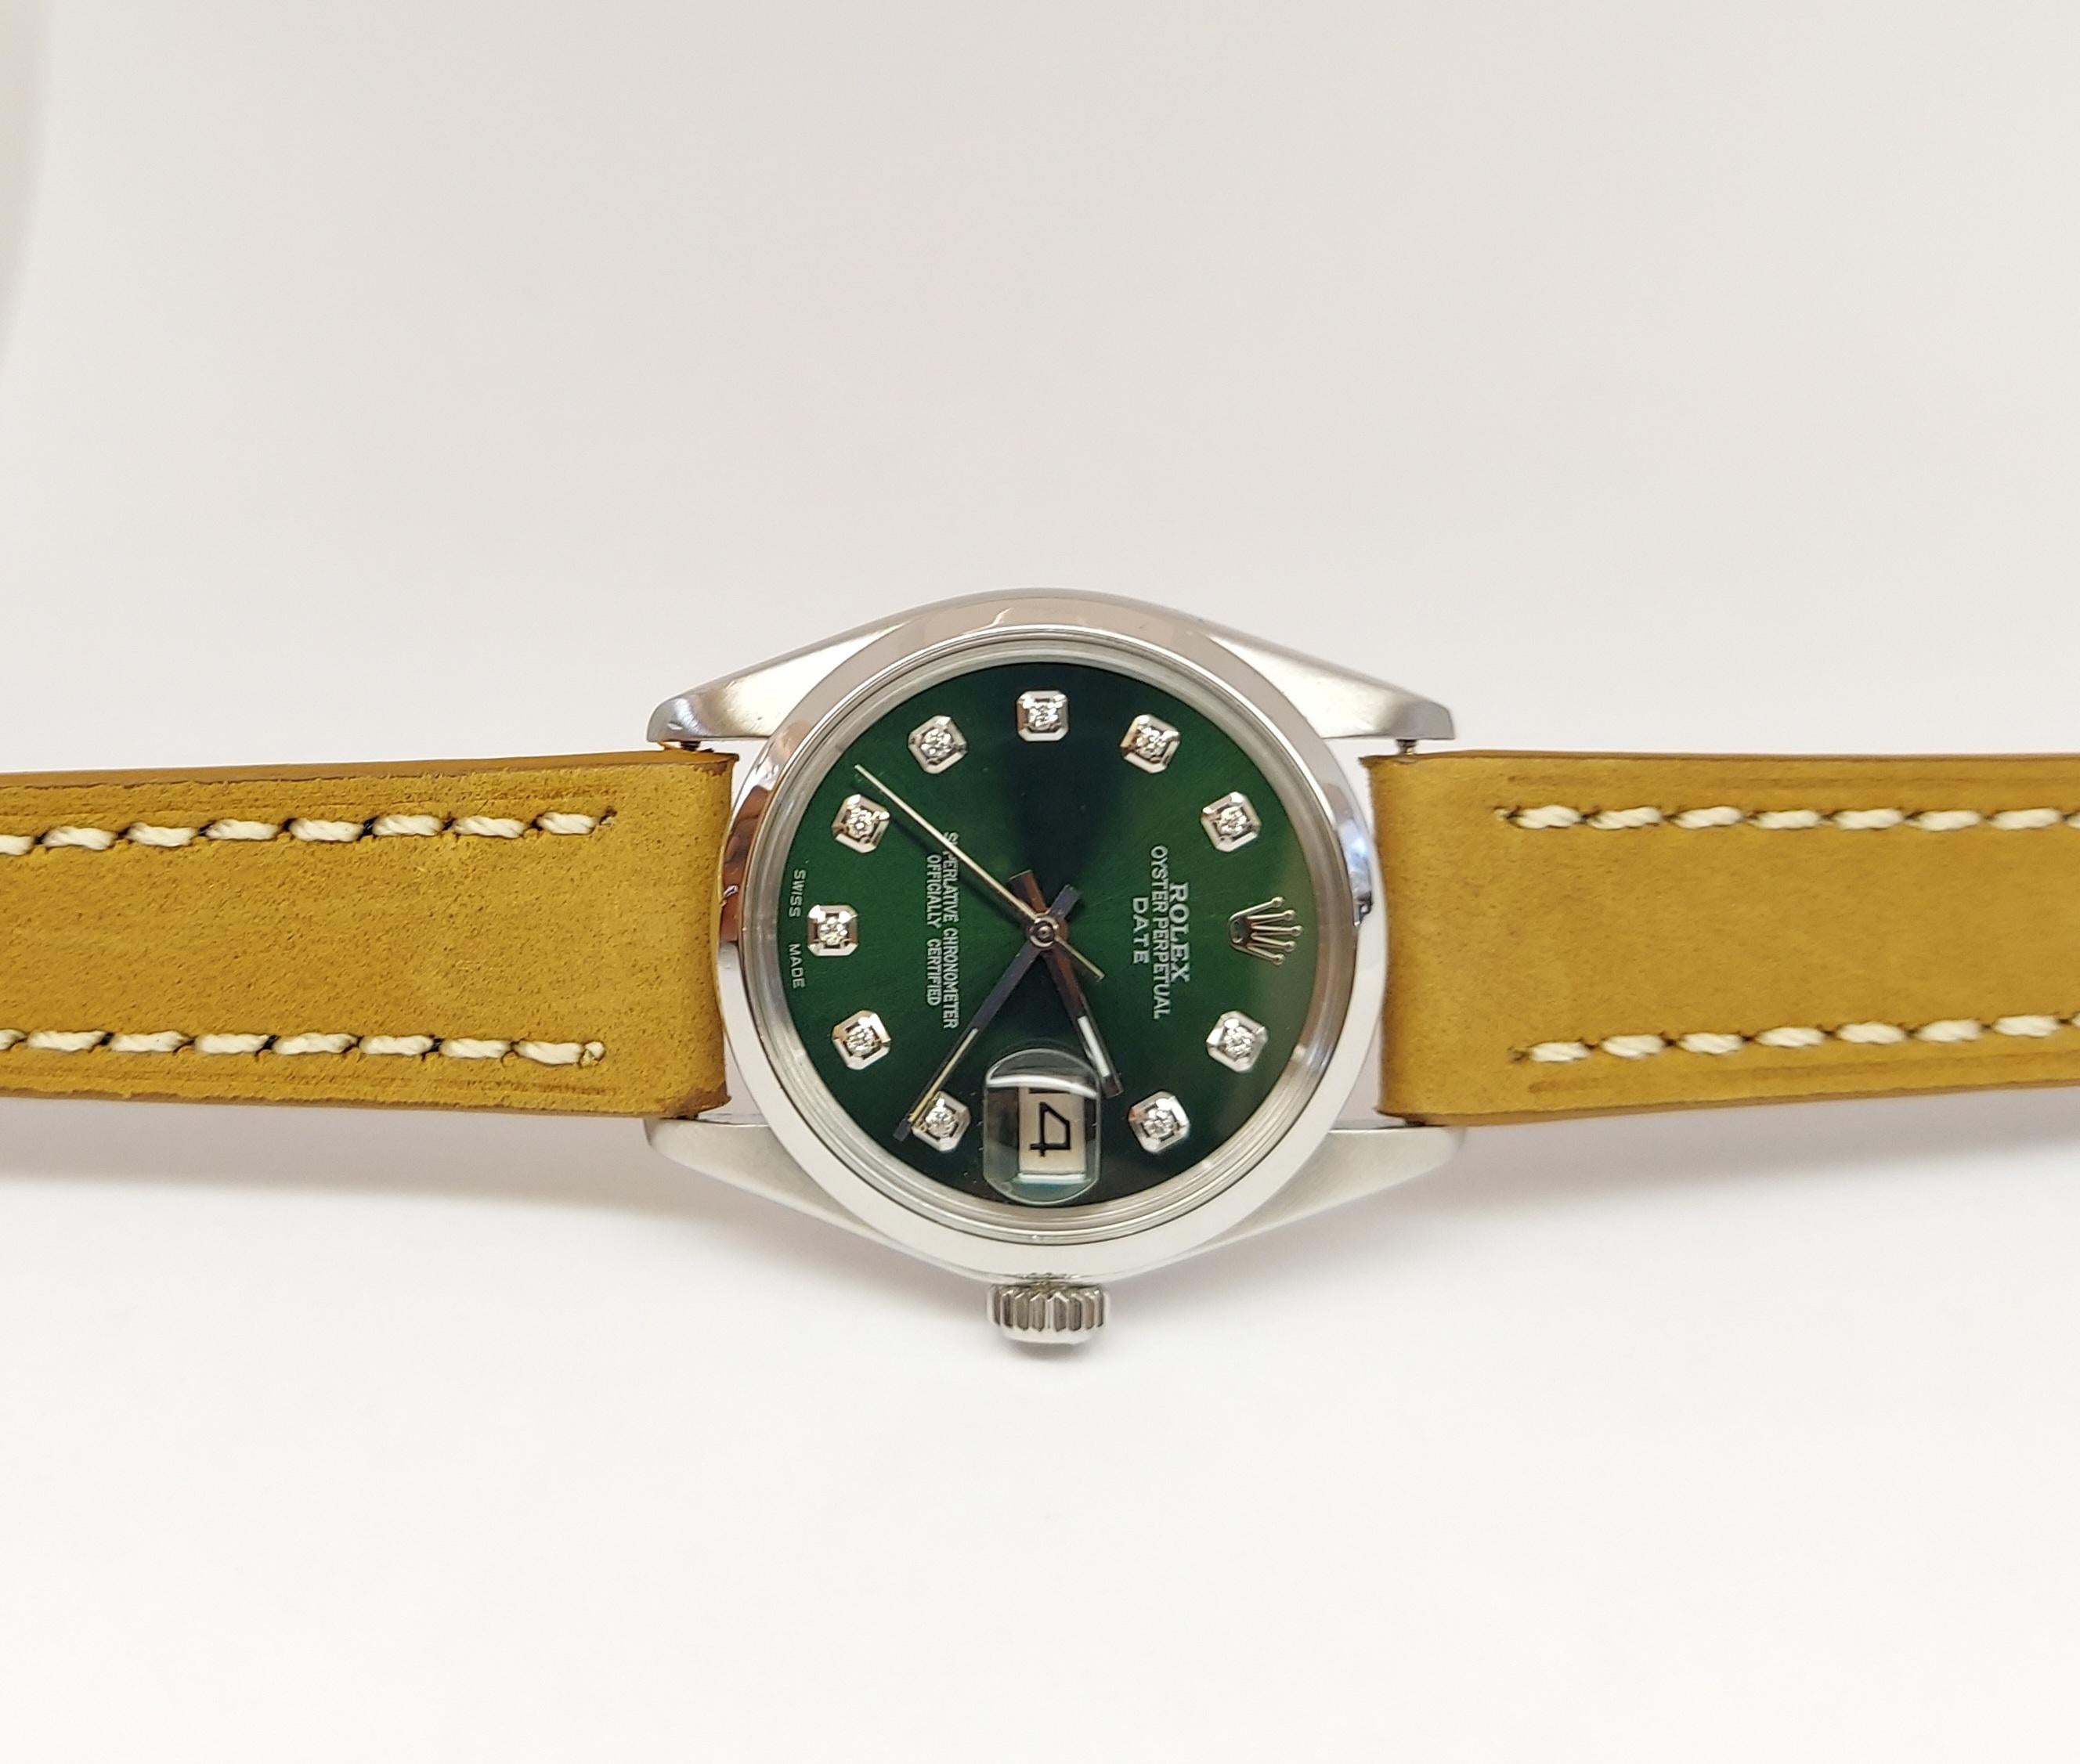 Brand - Rolex 
Model - 1500 (DATE)
Case size - 34mm
Bezel - Smooth Steel 
Crystal -Acrylic 
Metals - Steel 
Dial - Refinished Green Diamond
Movement - Automatic CAL.1570
Band - Generic Brown Leather

Two-Year in house Warranty
New Generic watch Box